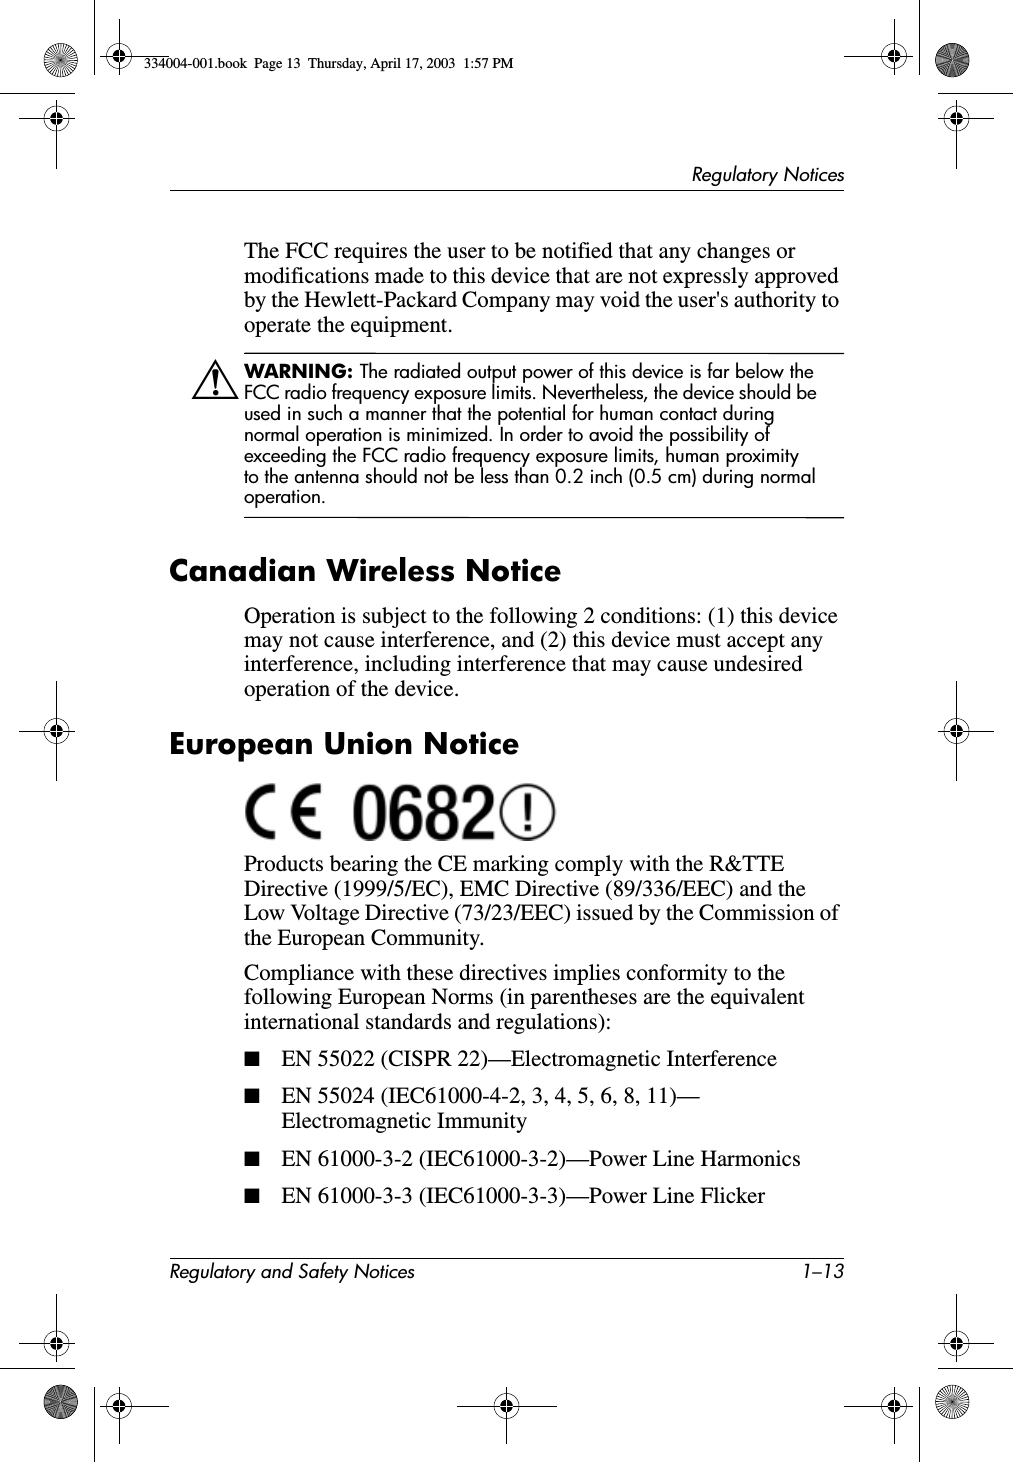 Regulatory NoticesRegulatory and Safety Notices 1–13The FCC requires the user to be notified that any changes or modifications made to this device that are not expressly approved by the Hewlett-Packard Company may void the user&apos;s authority to operate the equipment.ÅWARNING: The radiated output power of this device is far below the FCC radio frequency exposure limits. Nevertheless, the device should be used in such a manner that the potential for human contact during normal operation is minimized. In order to avoid the possibility of exceeding the FCC radio frequency exposure limits, human proximity to the antenna should not be less than 0.2 inch (0.5 cm) during normal operation.Canadian Wireless NoticeOperation is subject to the following 2 conditions: (1) this device may not cause interference, and (2) this device must accept any interference, including interference that may cause undesired operation of the device.European Union NoticeProducts bearing the CE marking comply with the R&amp;TTE Directive (1999/5/EC), EMC Directive (89/336/EEC) and the Low Voltage Directive (73/23/EEC) issued by the Commission of the European Community.Compliance with these directives implies conformity to the following European Norms (in parentheses are the equivalent international standards and regulations):■EN 55022 (CISPR 22)—Electromagnetic Interference■EN 55024 (IEC61000-4-2, 3, 4, 5, 6, 8, 11)— Electromagnetic Immunity■EN 61000-3-2 (IEC61000-3-2)—Power Line Harmonics■EN 61000-3-3 (IEC61000-3-3)—Power Line Flicker334004-001.book  Page 13  Thursday, April 17, 2003  1:57 PM